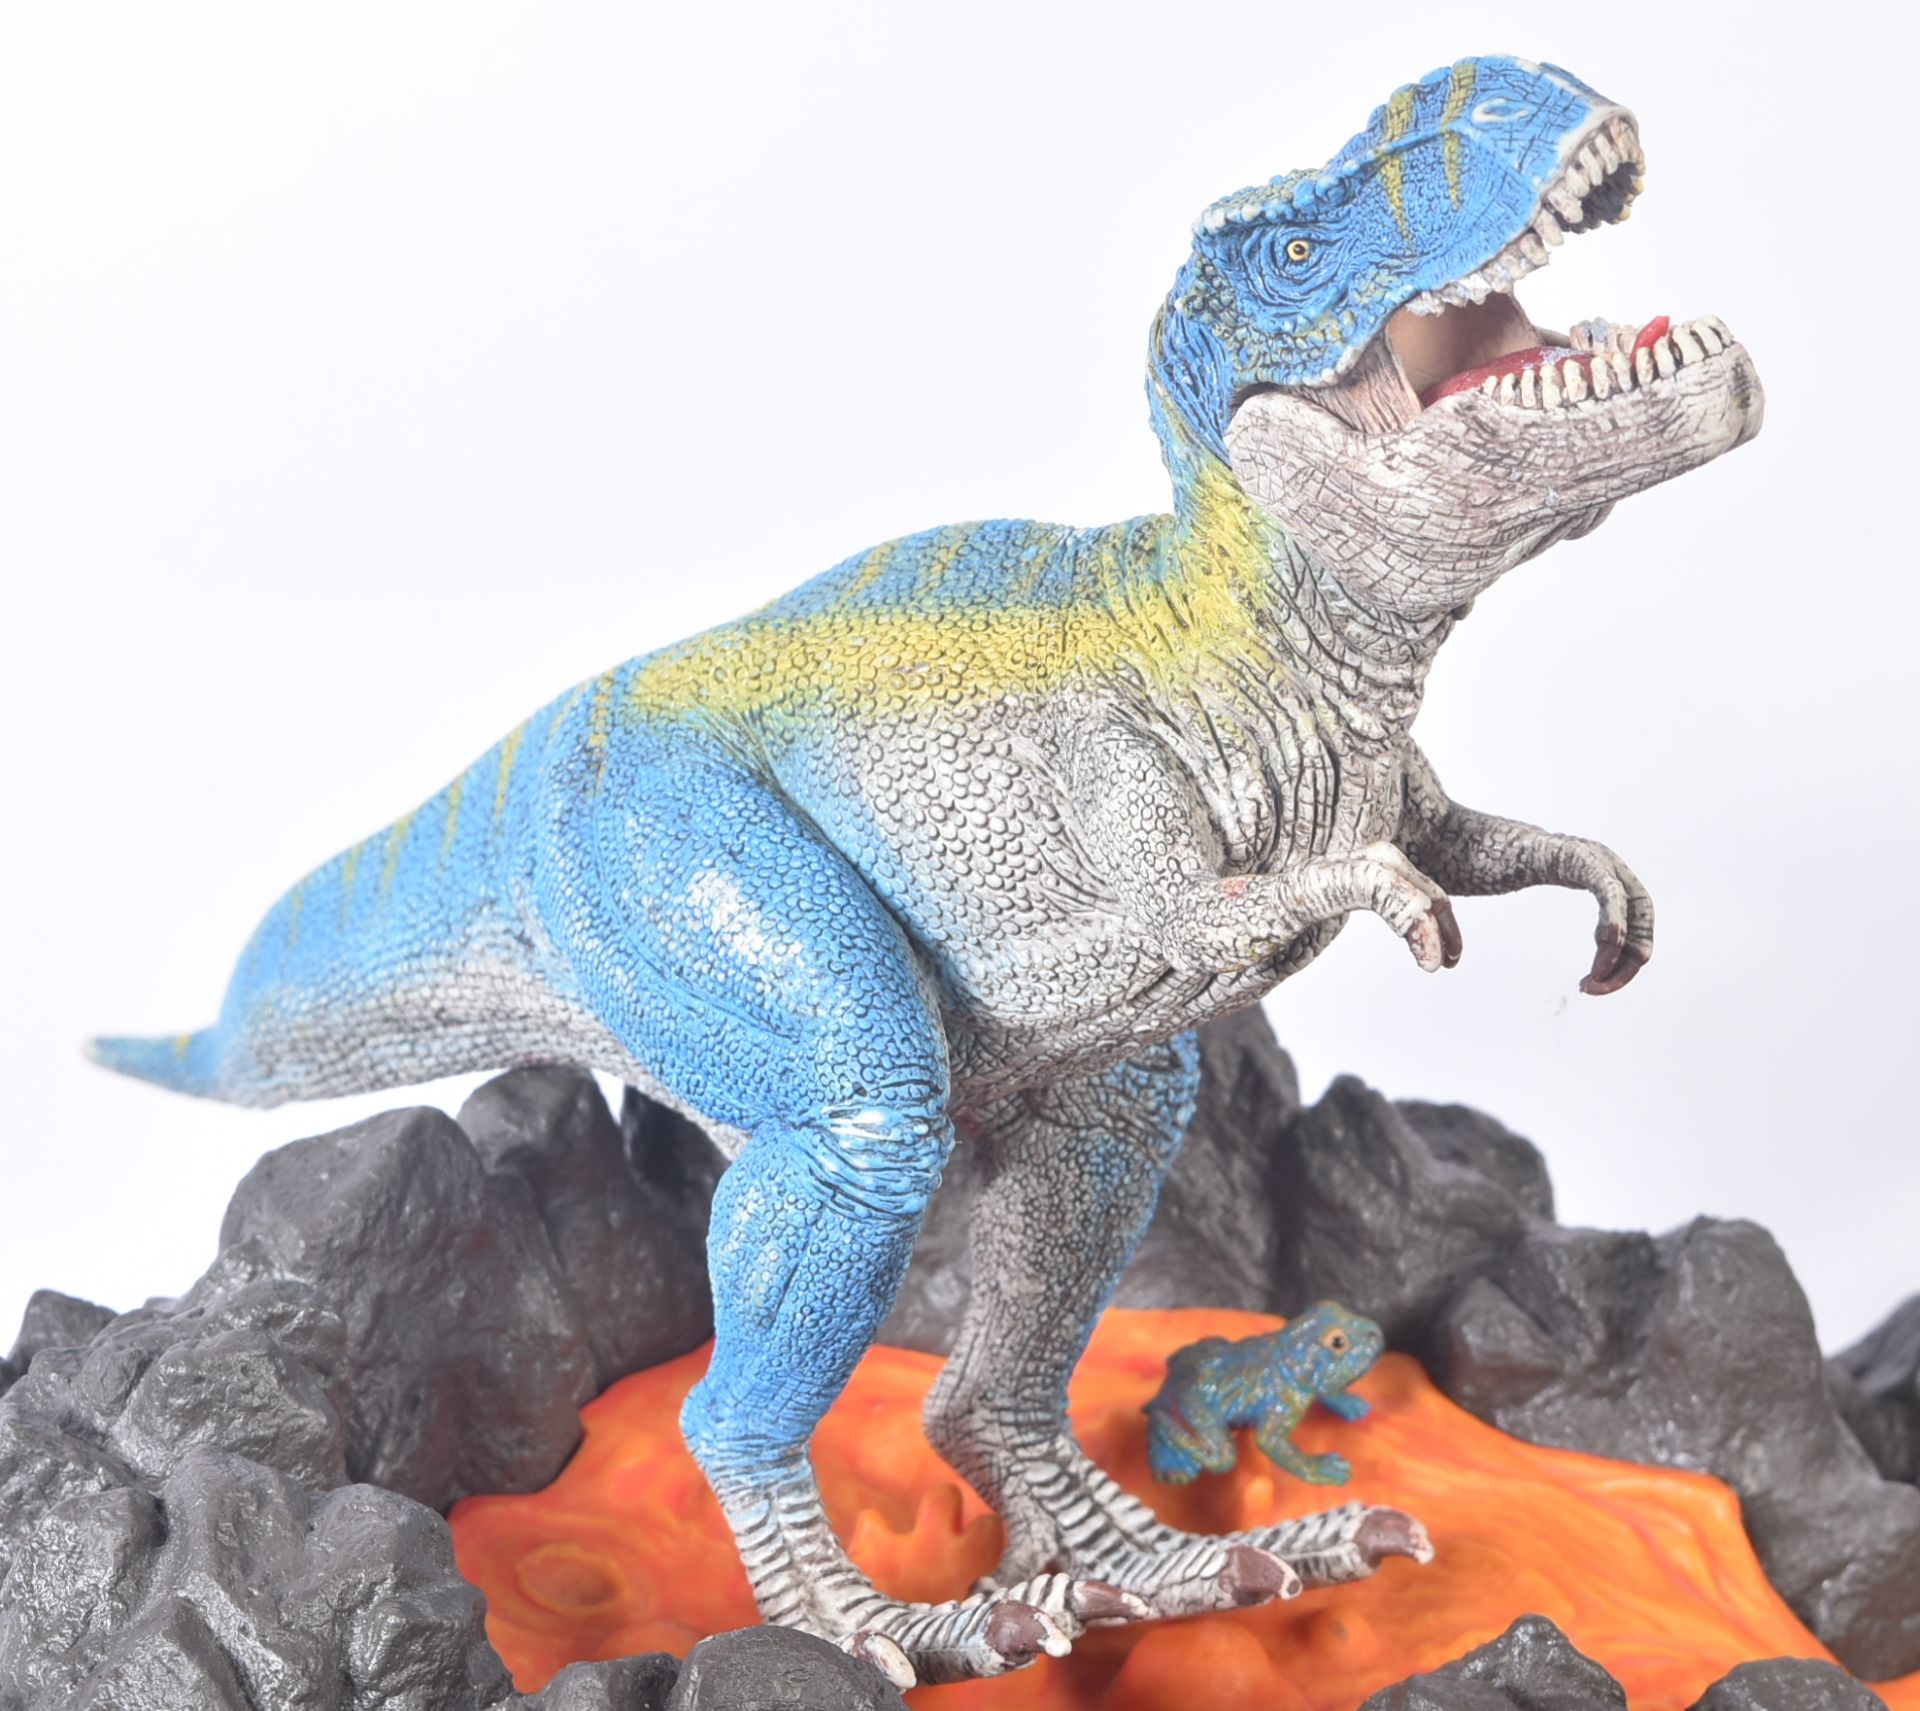 SCHLEICH VOLCANO PLAYSET WITH DINOSAURS - Image 5 of 10